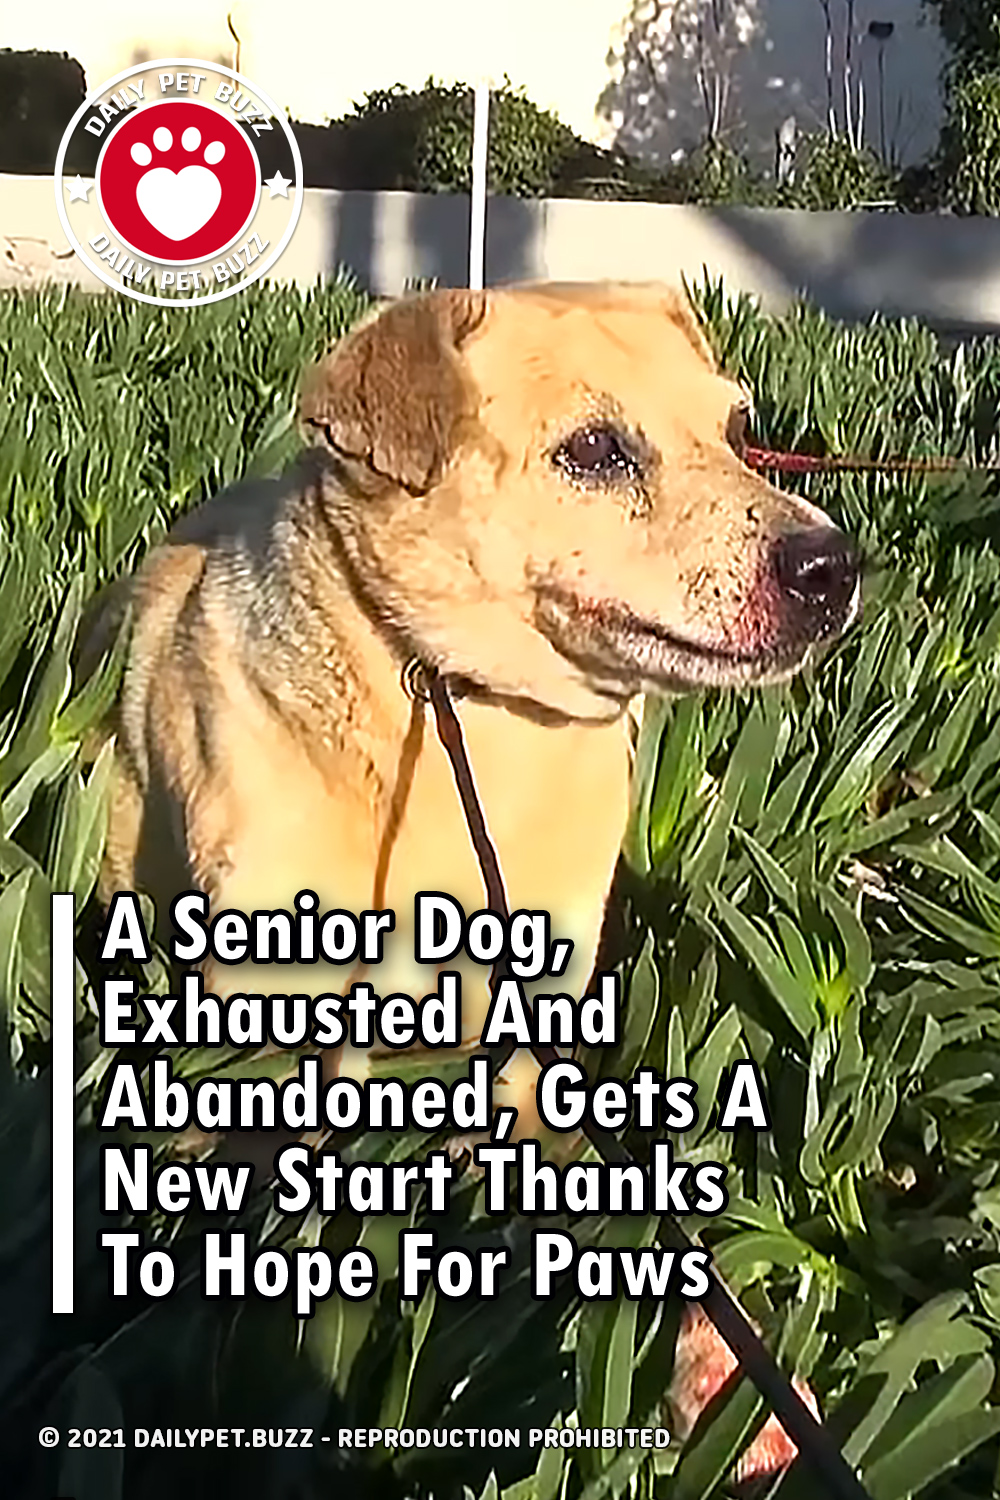 A Senior Dog, Exhausted And Abandoned, Gets A New Start Thanks To Hope For Paws